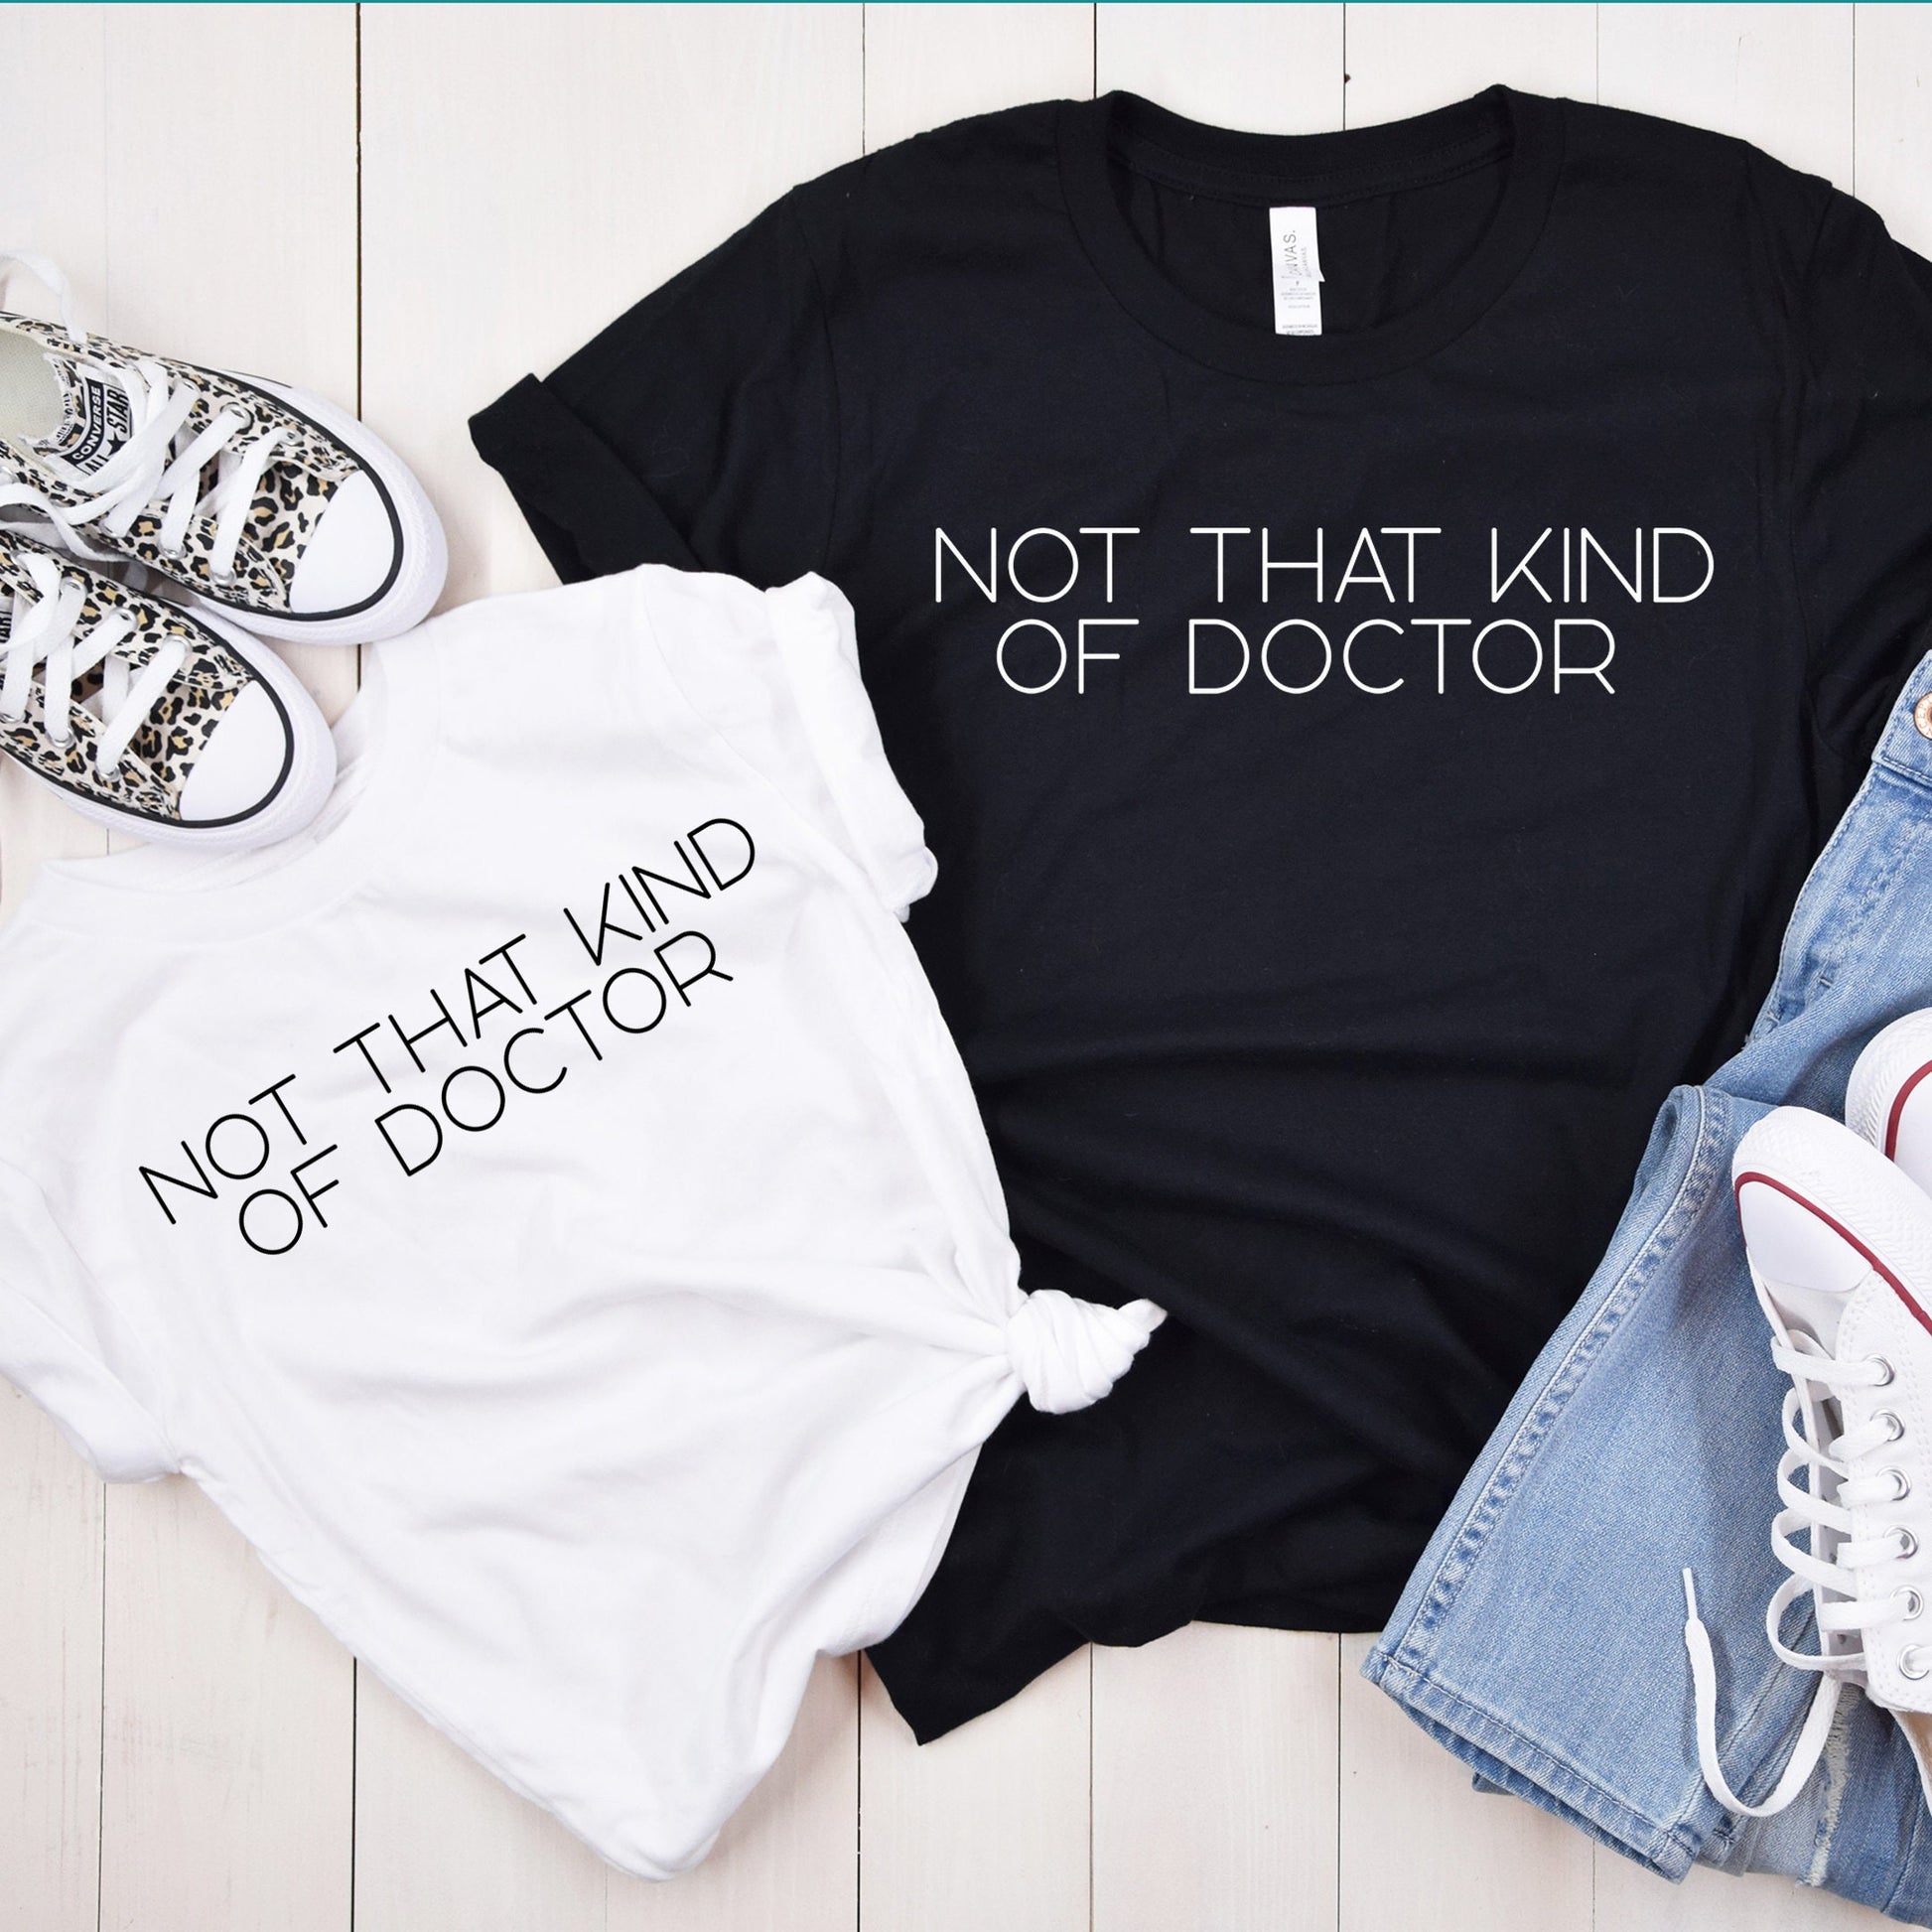 PHD Graduation Gift, Not That Kind Of Doctor, Phd Shirt, Phinished, Dissertation, Phd Gift, Doctorate Gift, Doctor Graduation Gift, Graduate